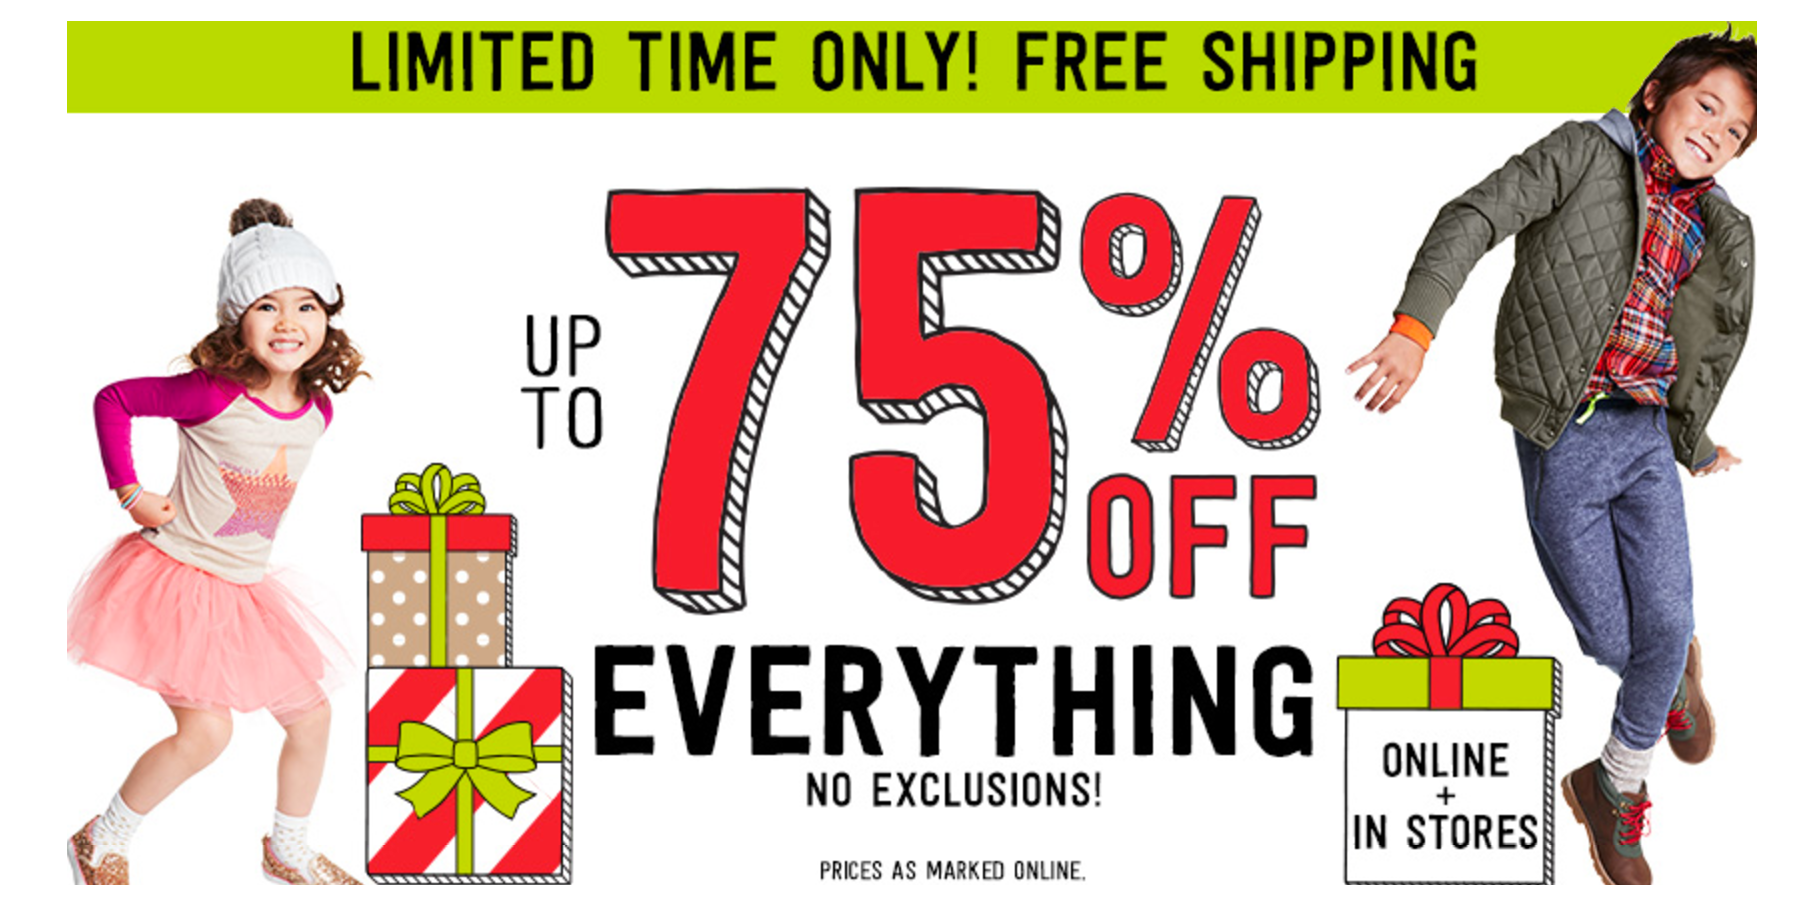 Crazy 8 Black Friday is LIVE! Up To 75% Off Everything & FREE Shipping! $8.88 Jeans, $5.00 Microfleece, $5.00 Tee’s and More!